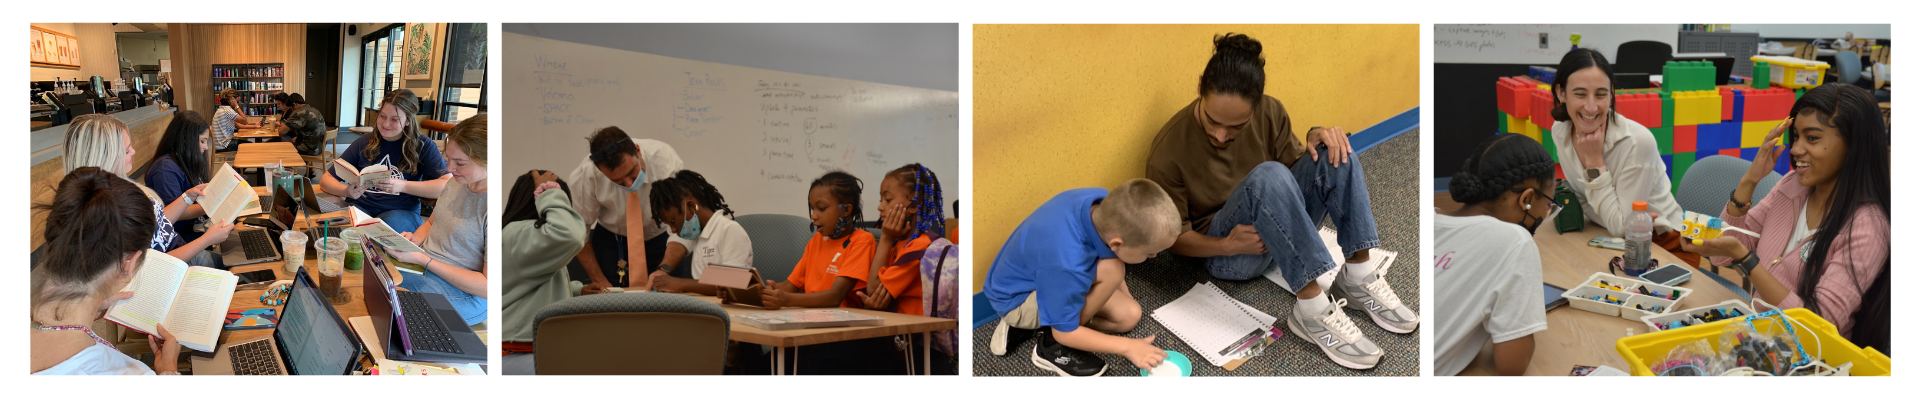 Collage of 4 images with teachers and students in a classroom setting